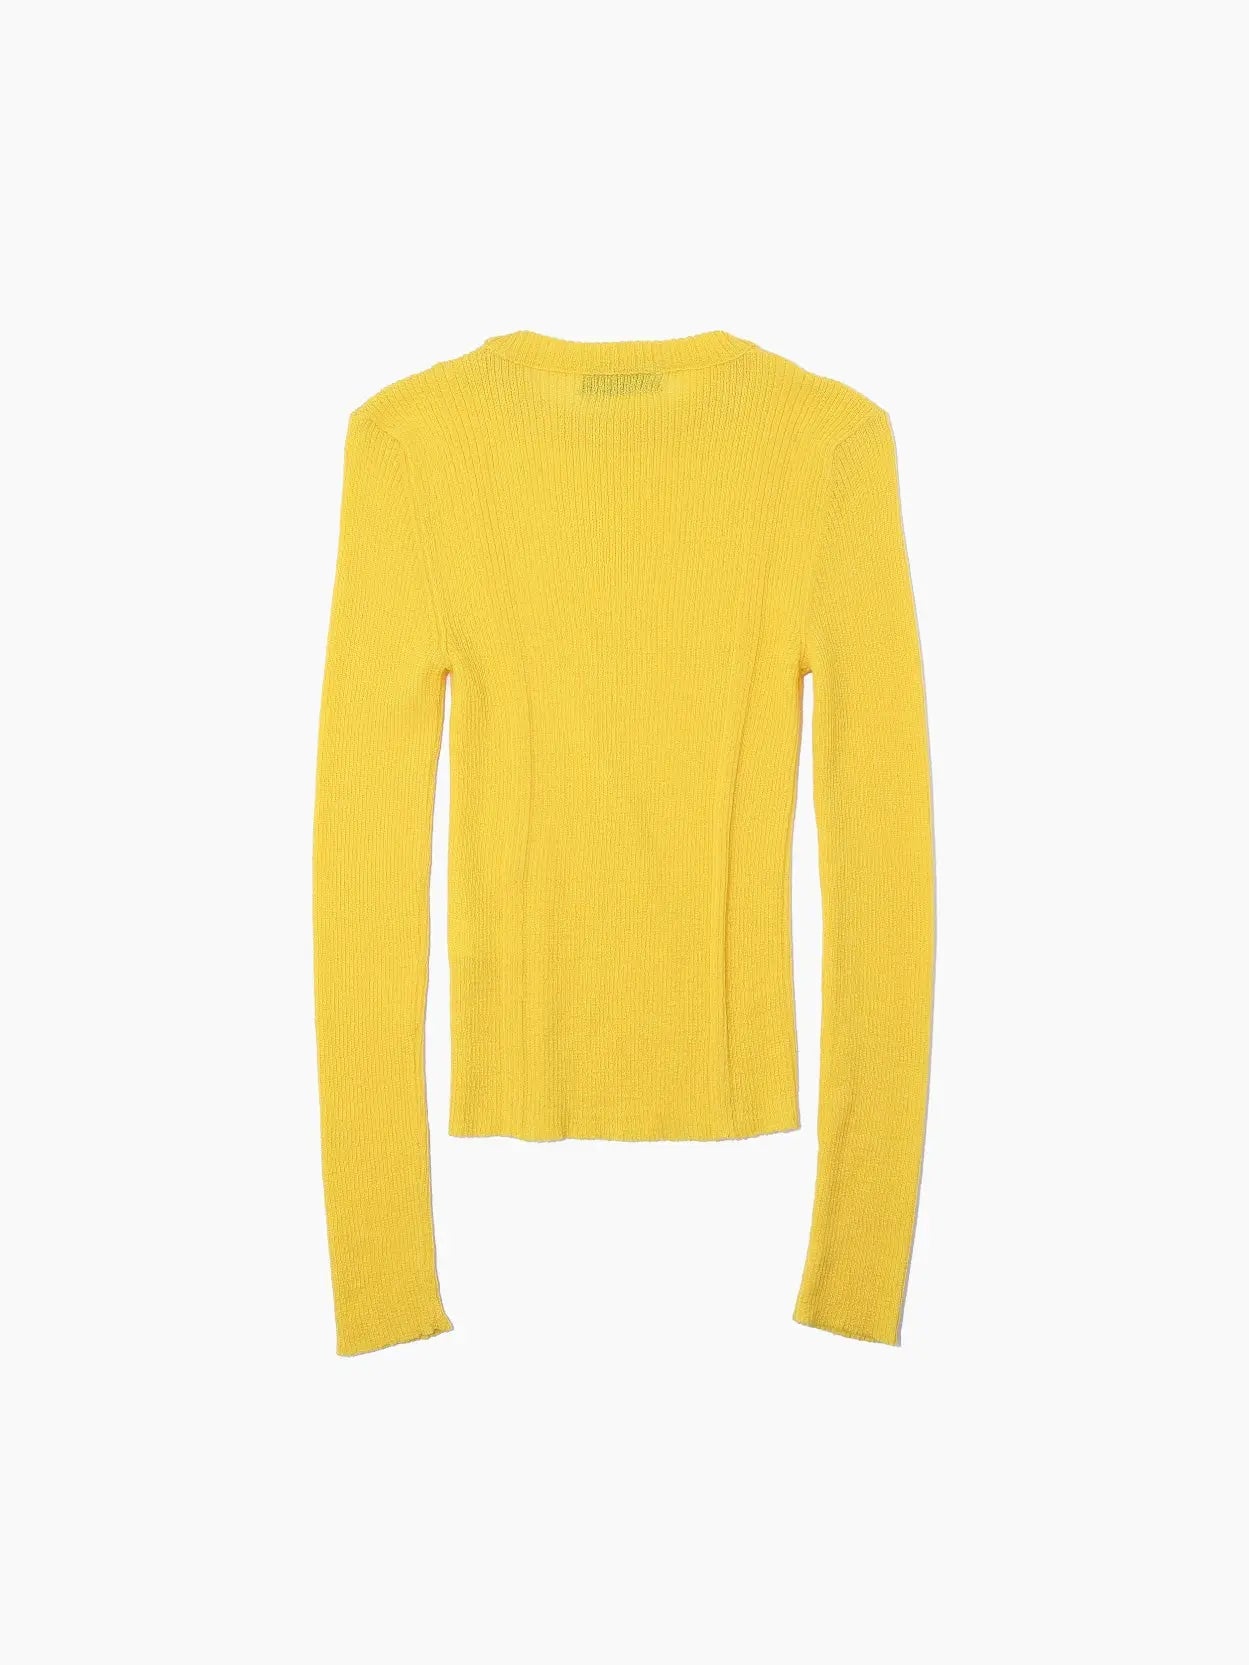 Bright yellow, long-sleeve, crew-neck sweater with a ribbed texture. The Masla Long Sleeve Yellow by Bielo has a snug fit and a simple, minimalist design, perfect for casual or semi-casual wear. Displayed on a plain white background, it's an ideal find from our Barcelona store collection at bassalstore.